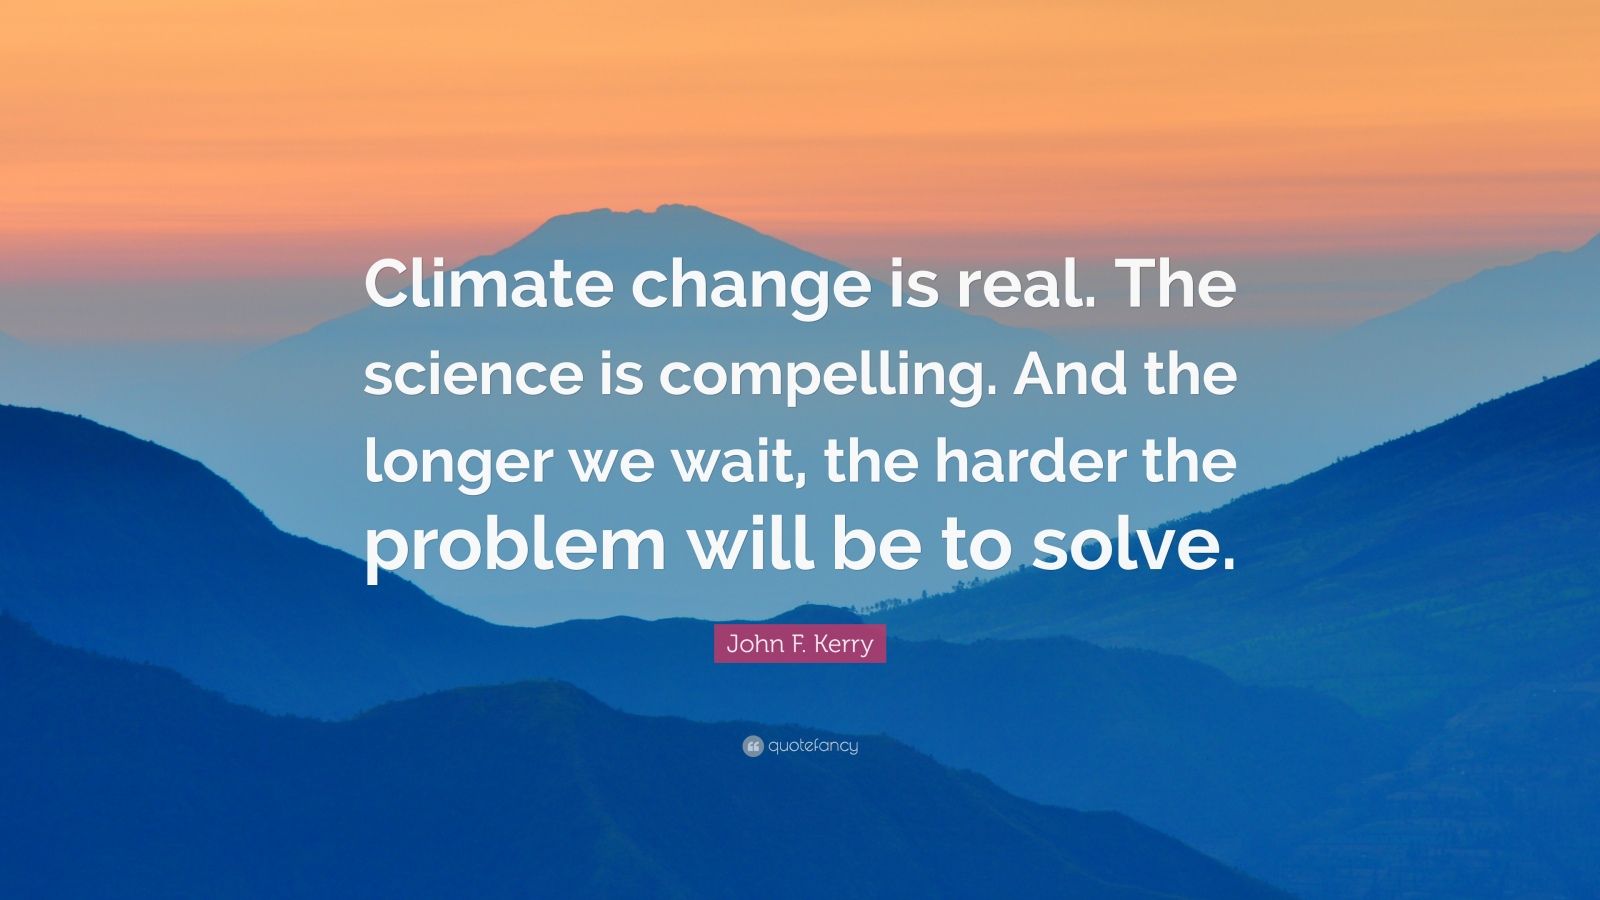 John F. Kerry Quote: “Climate change is real. The science is compelling